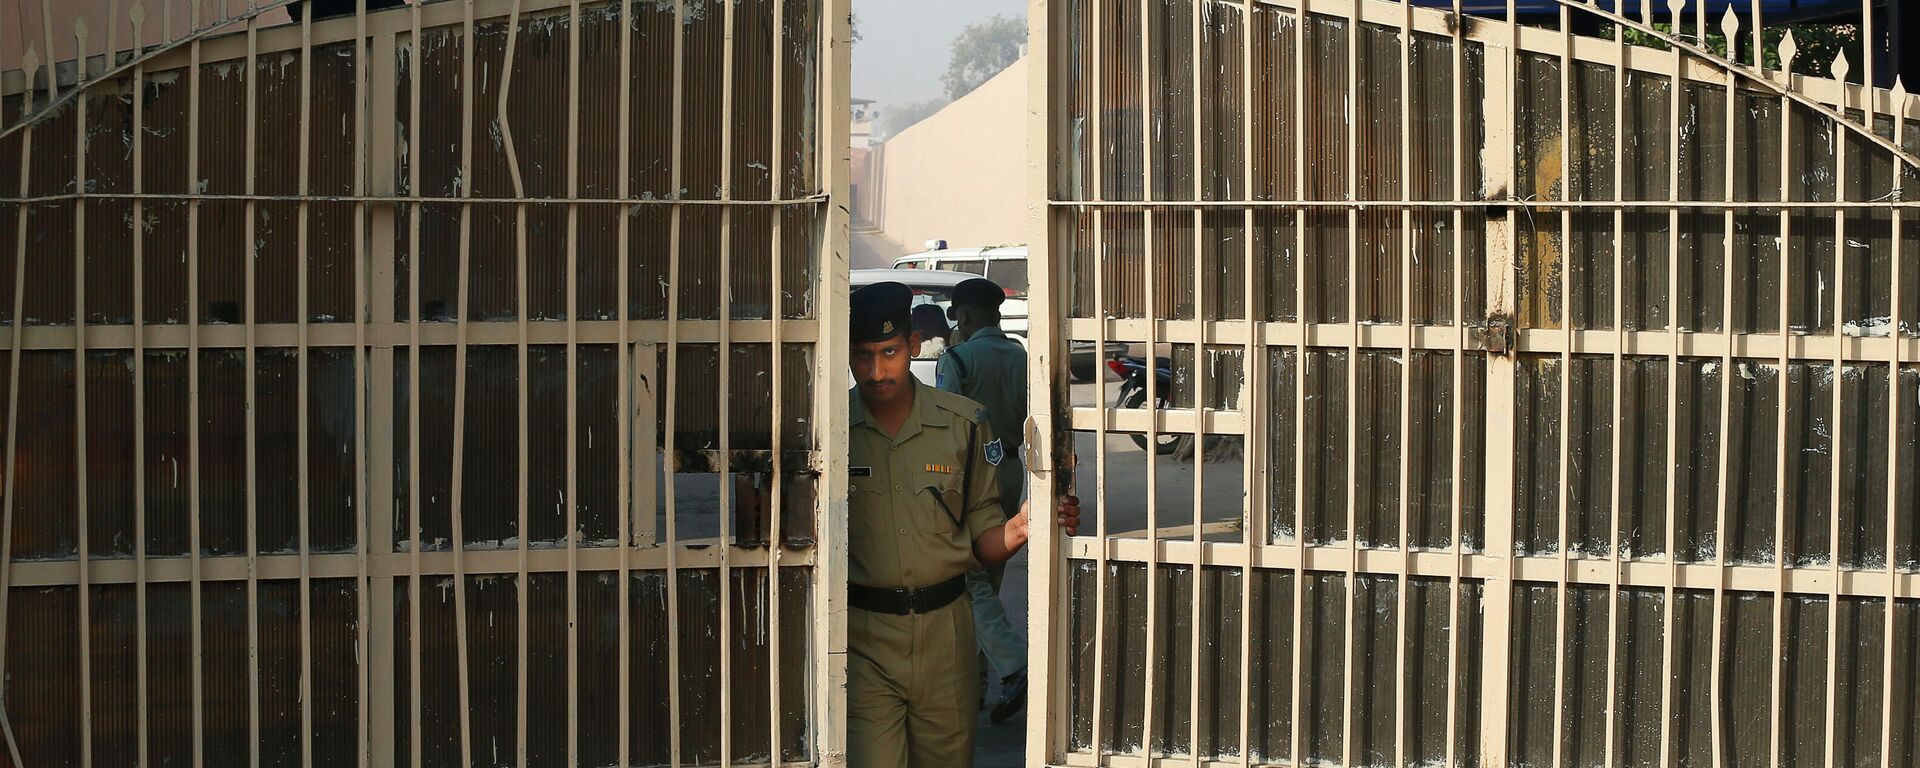 An Indian police officer prepares to close one of the gates at Tihar Jail, the largest complex of prisons in South Asia, in New Delhi, India, Monday, March 11, 2013 - اسپوتنیک افغانستان  , 1920, 01.01.2023